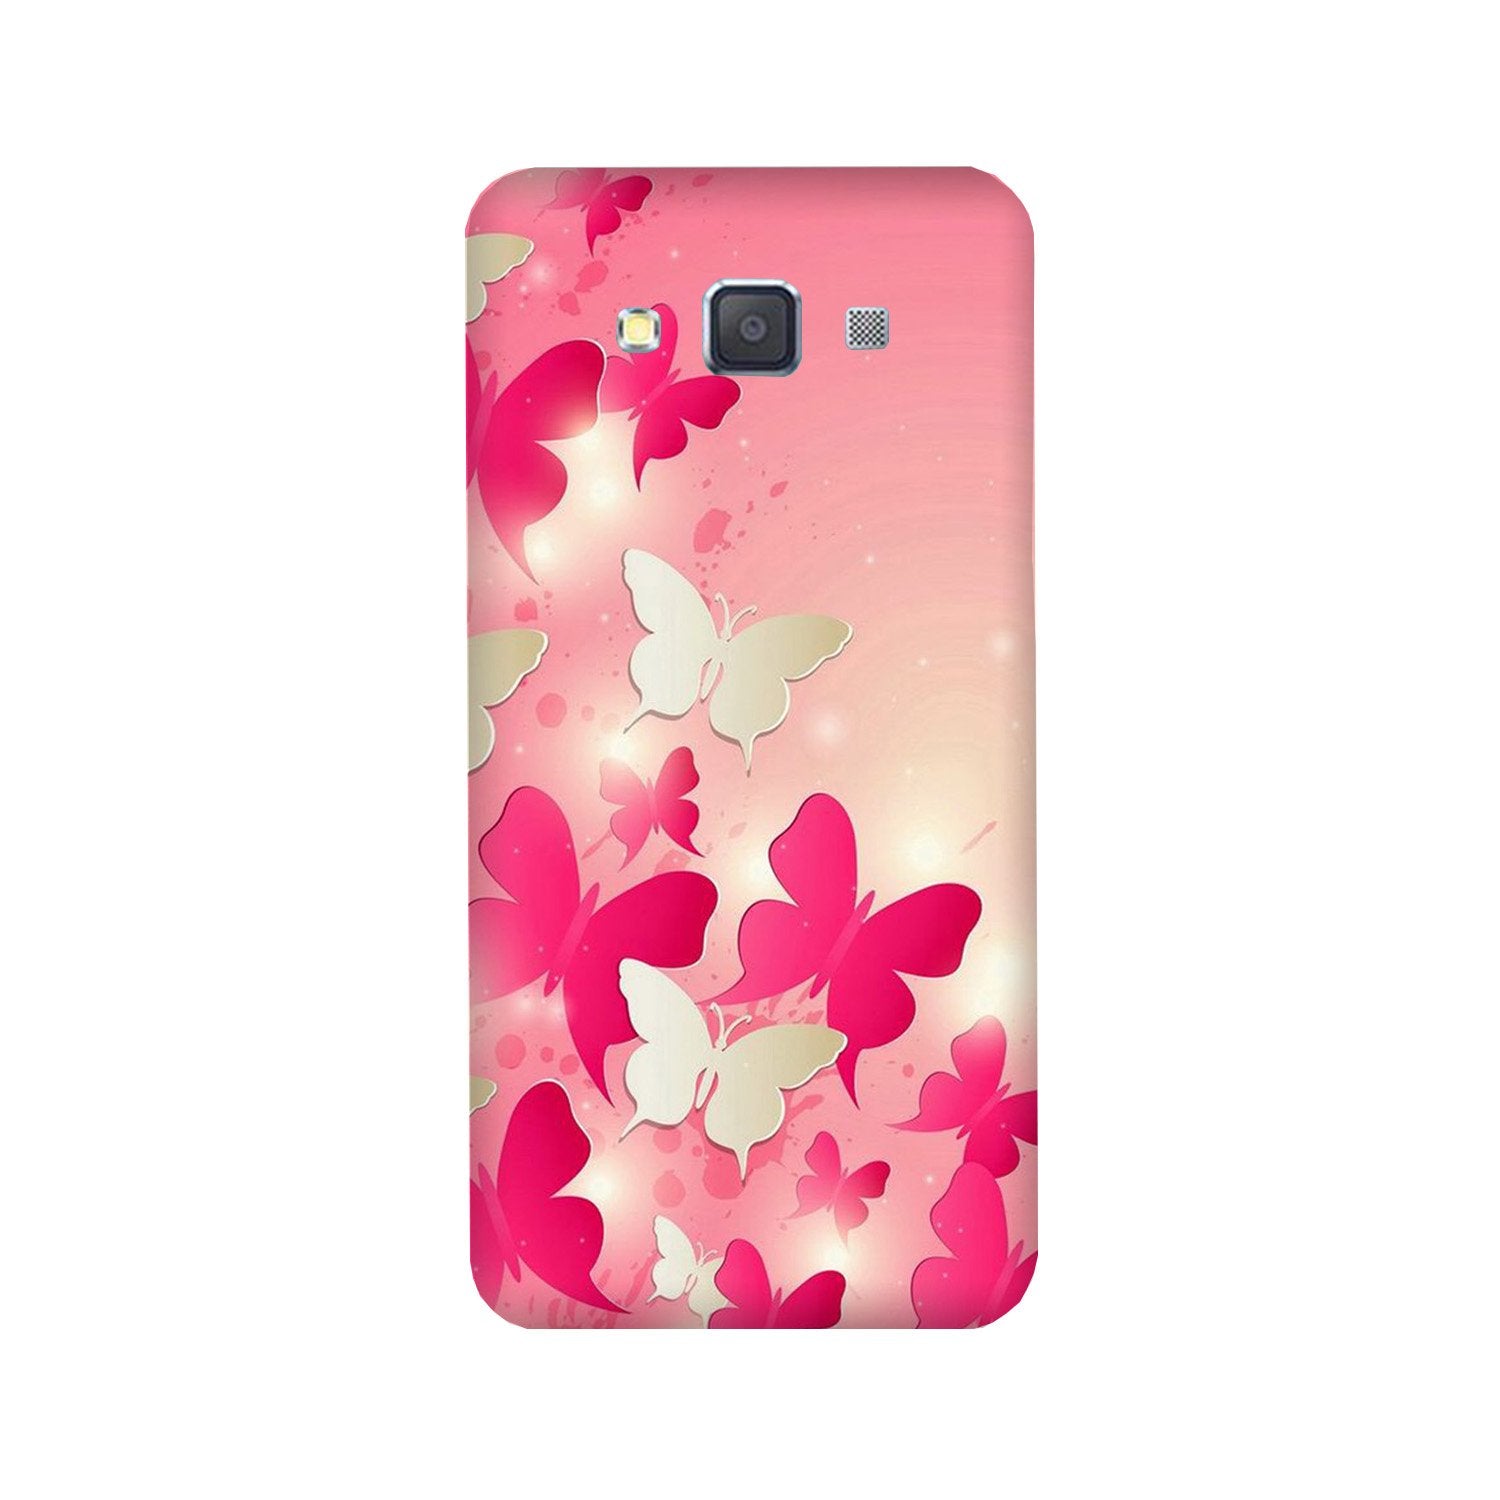 White Pick Butterflies Case for Galaxy Grand 2